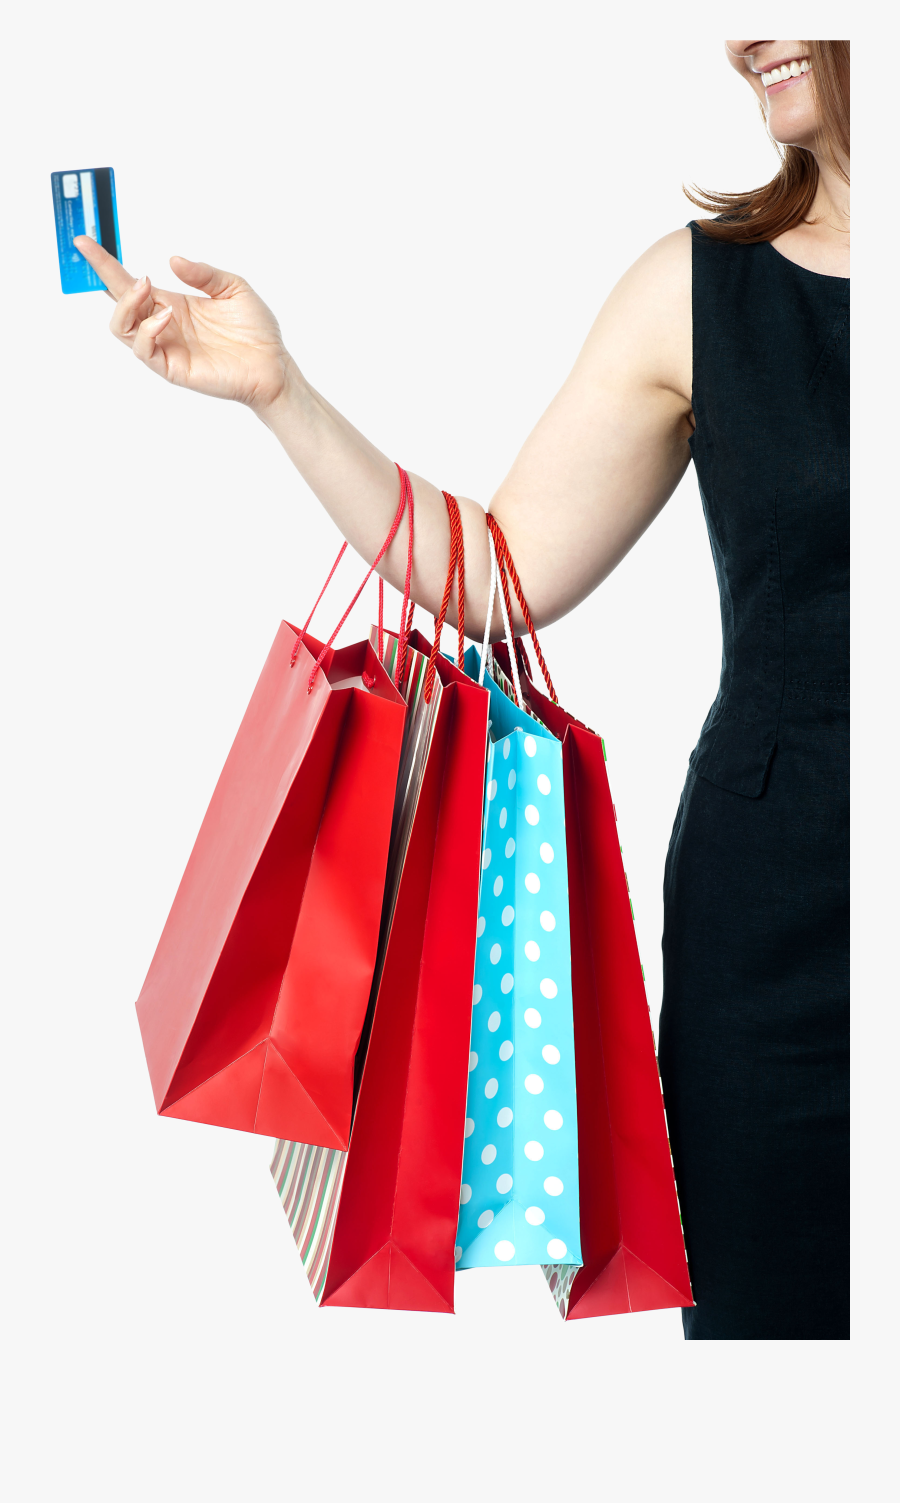 Shopping Images Png Hd, Transparent Clipart